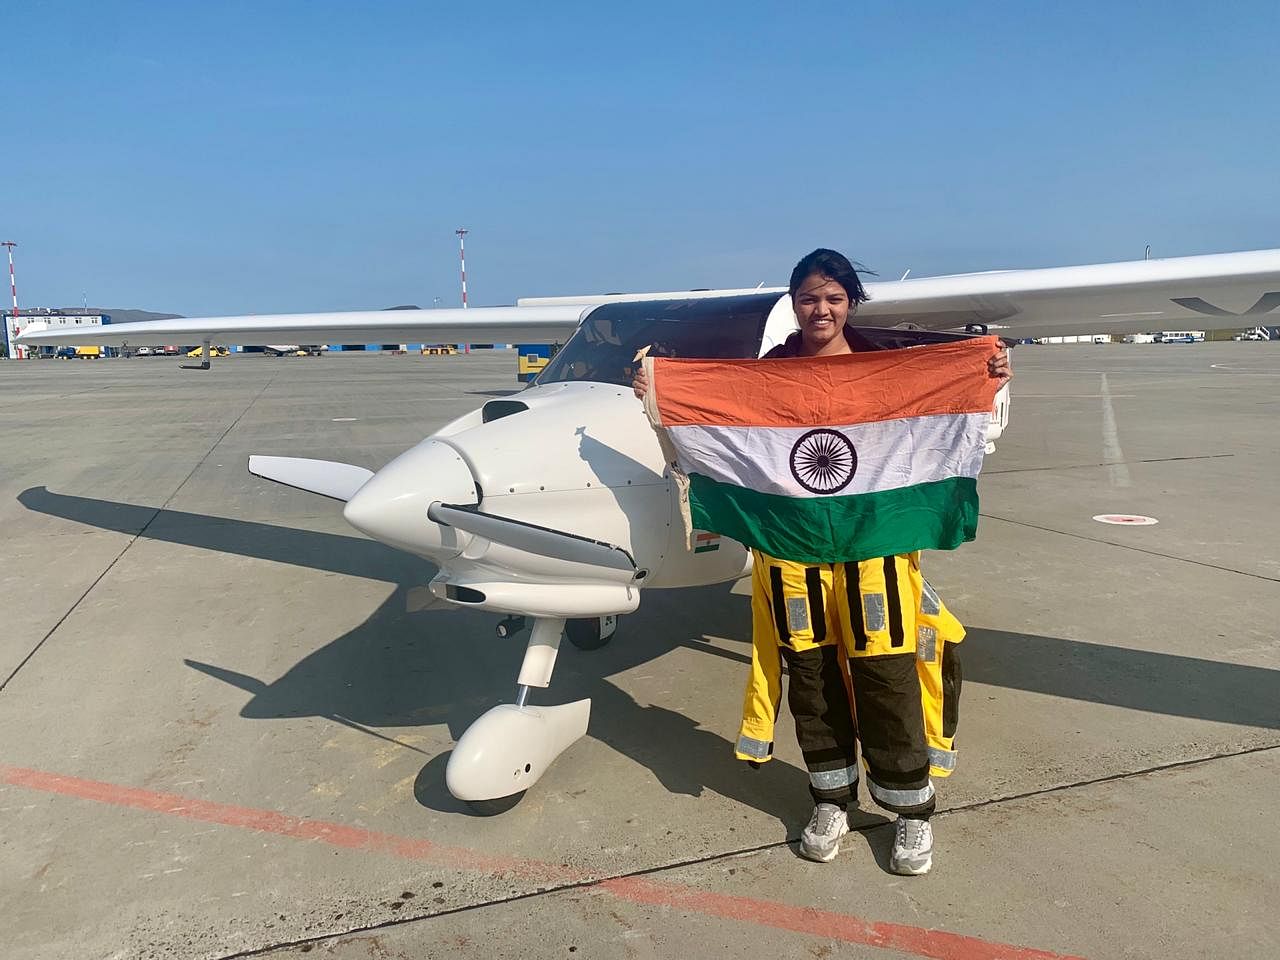 Pandit landed at Anadyr Airport in the Chukhotka Far East region of Russia at 01.54 UTC on August 21, 2019.